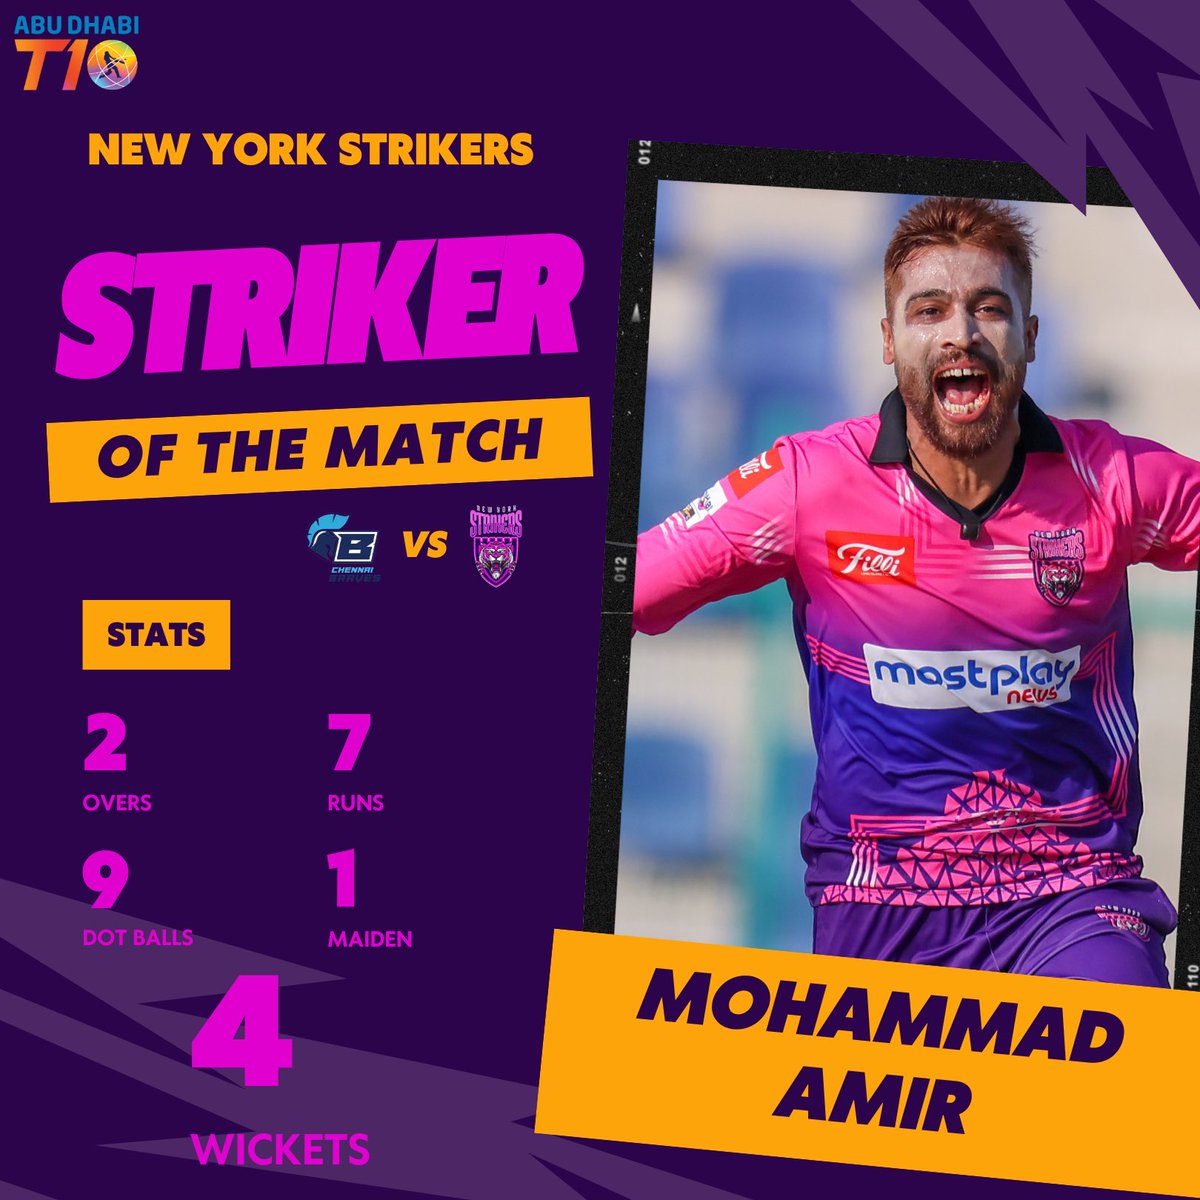 In a T10 match!!!! 😲😲😲

12 balls
9 dots
4 wickets
💥💥💥💥👑👑👑👑👏👏👏

@iamamirofficial
#PAKvsAUS #T10League #StrikeFearlessly #NYS #PakistanCricketTeam